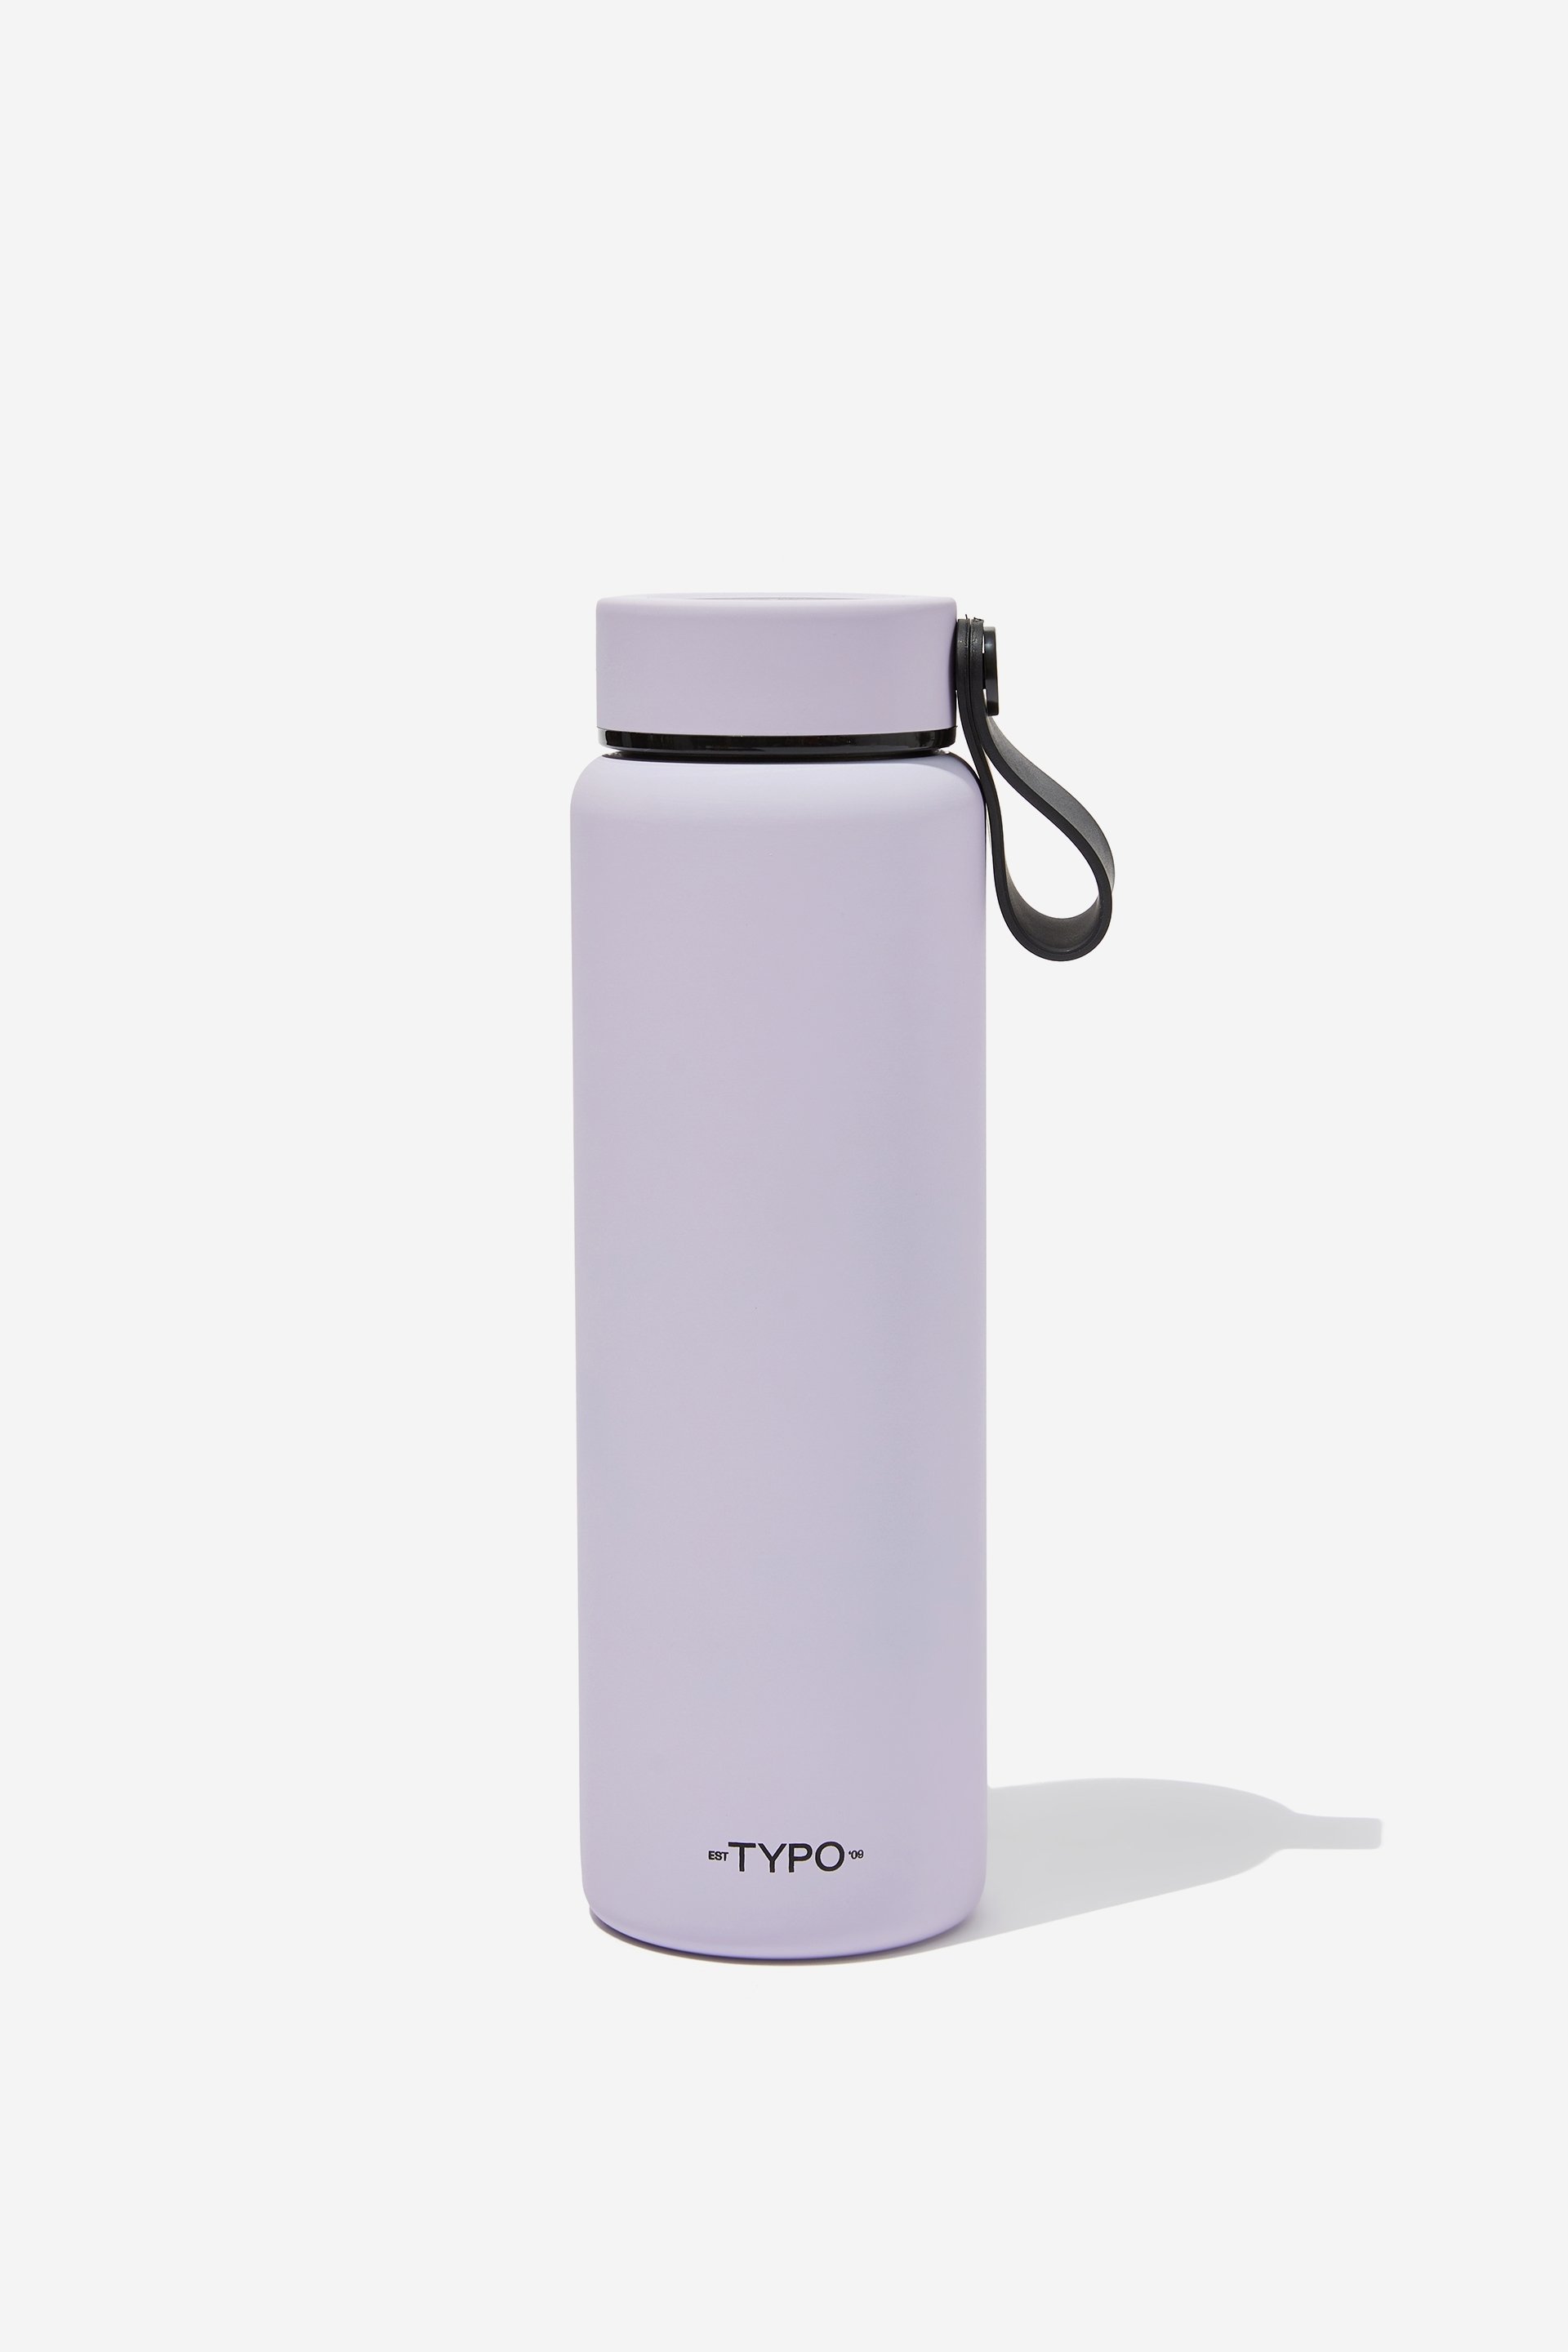 Typo - On The Move 500Ml Drink Bottle 2.0 - Soft lilac